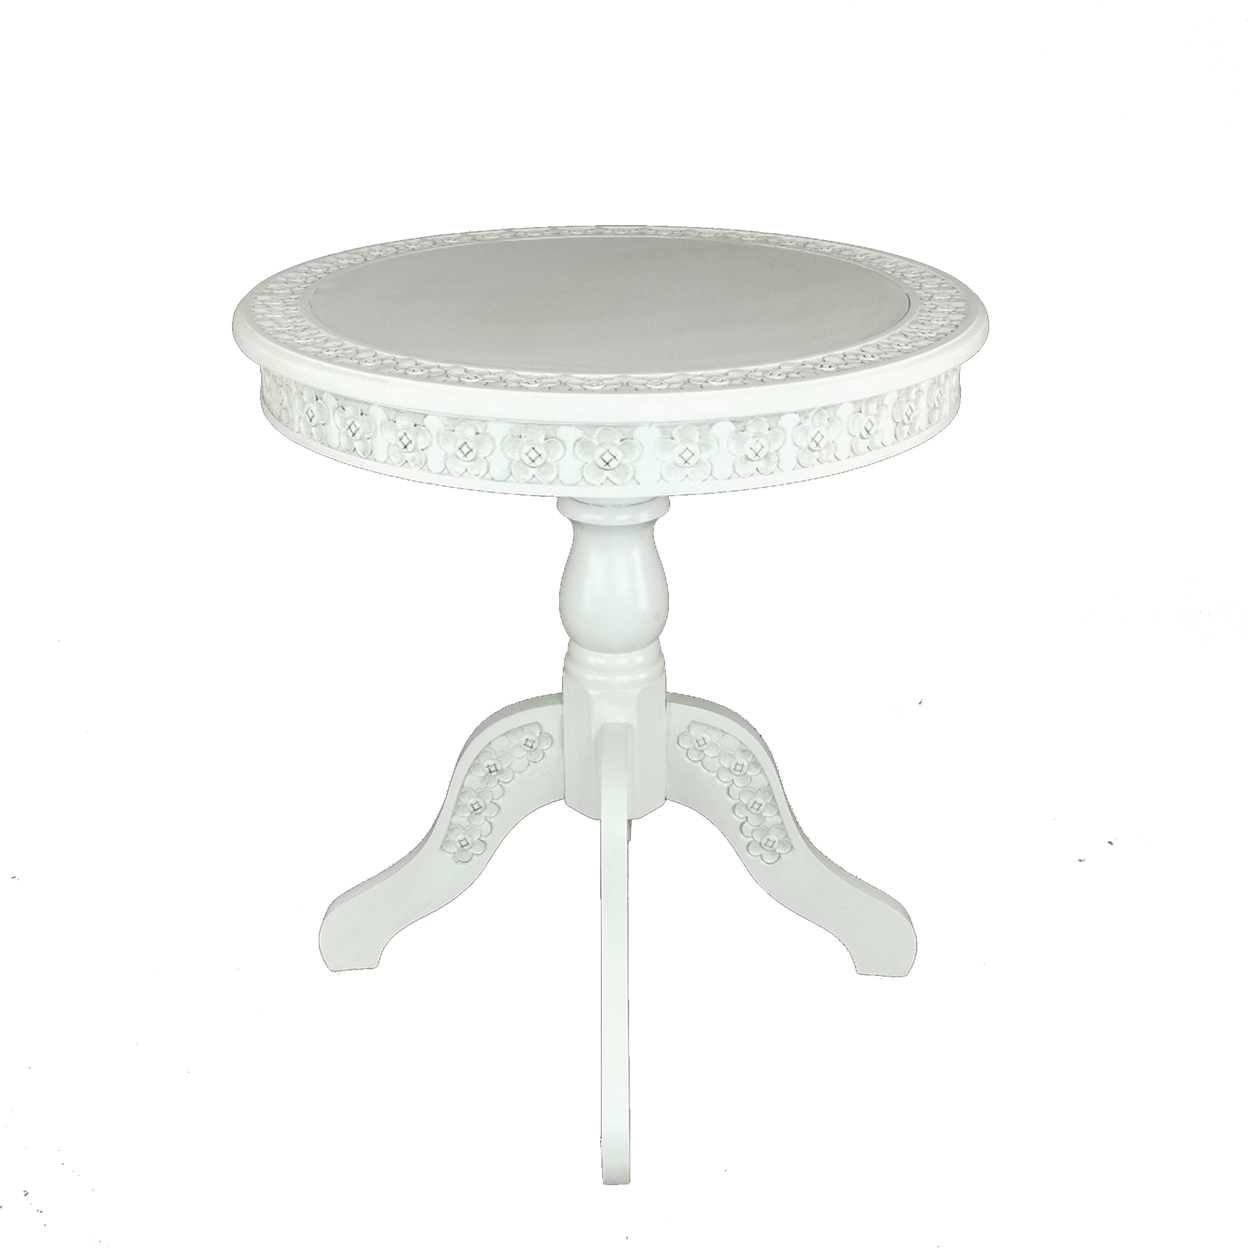 Theo 26 Inch Classic Wood Side Table, Round Tabletop, Floral Cared, White- Saltoro Sherpi- Saltoro Sherpi